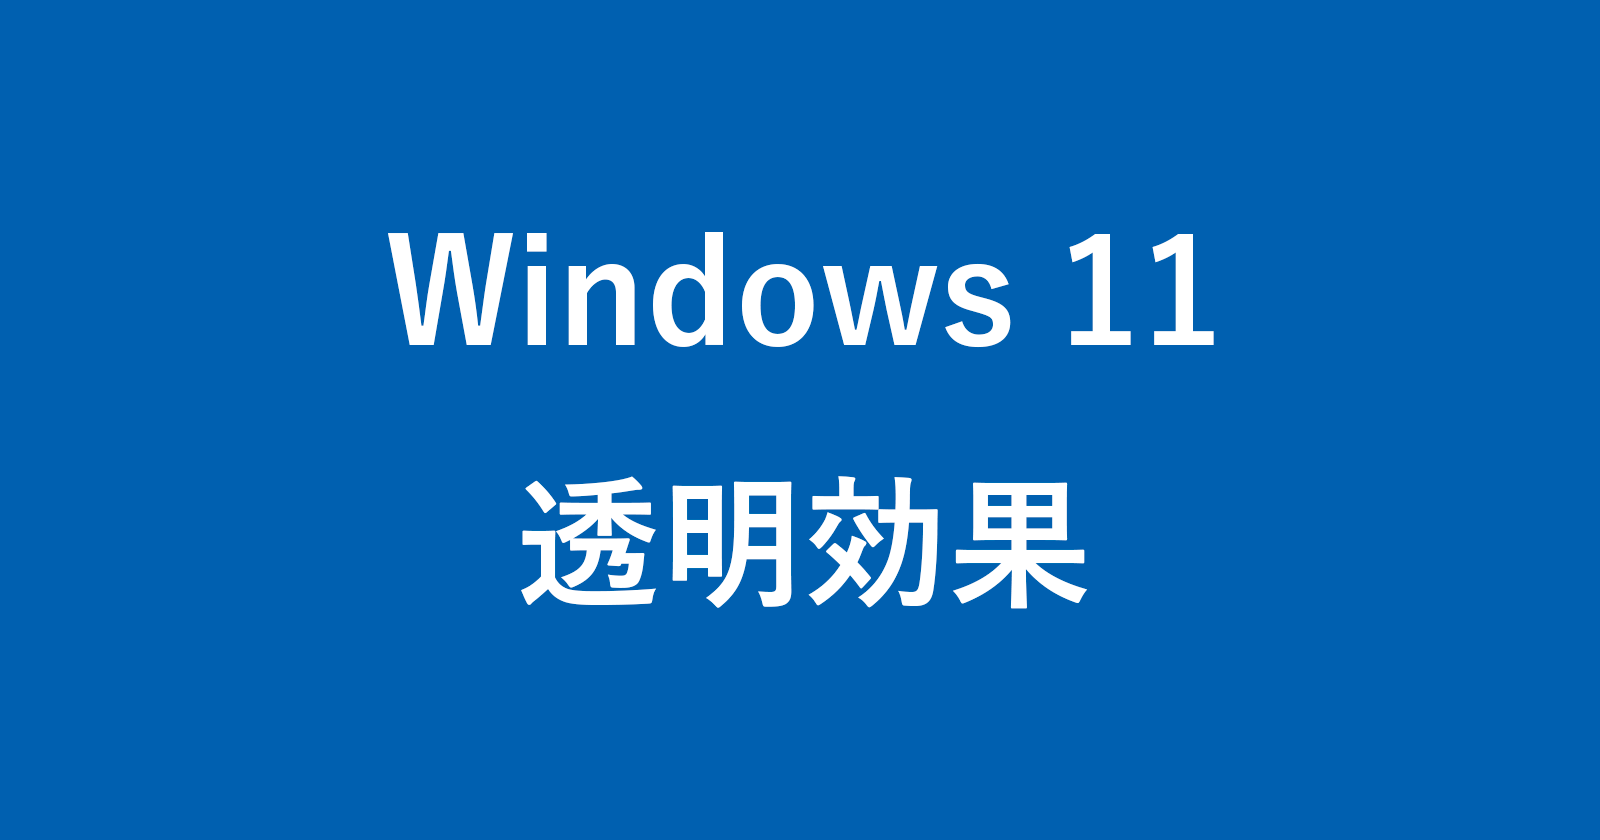 windows 11 transparency effects